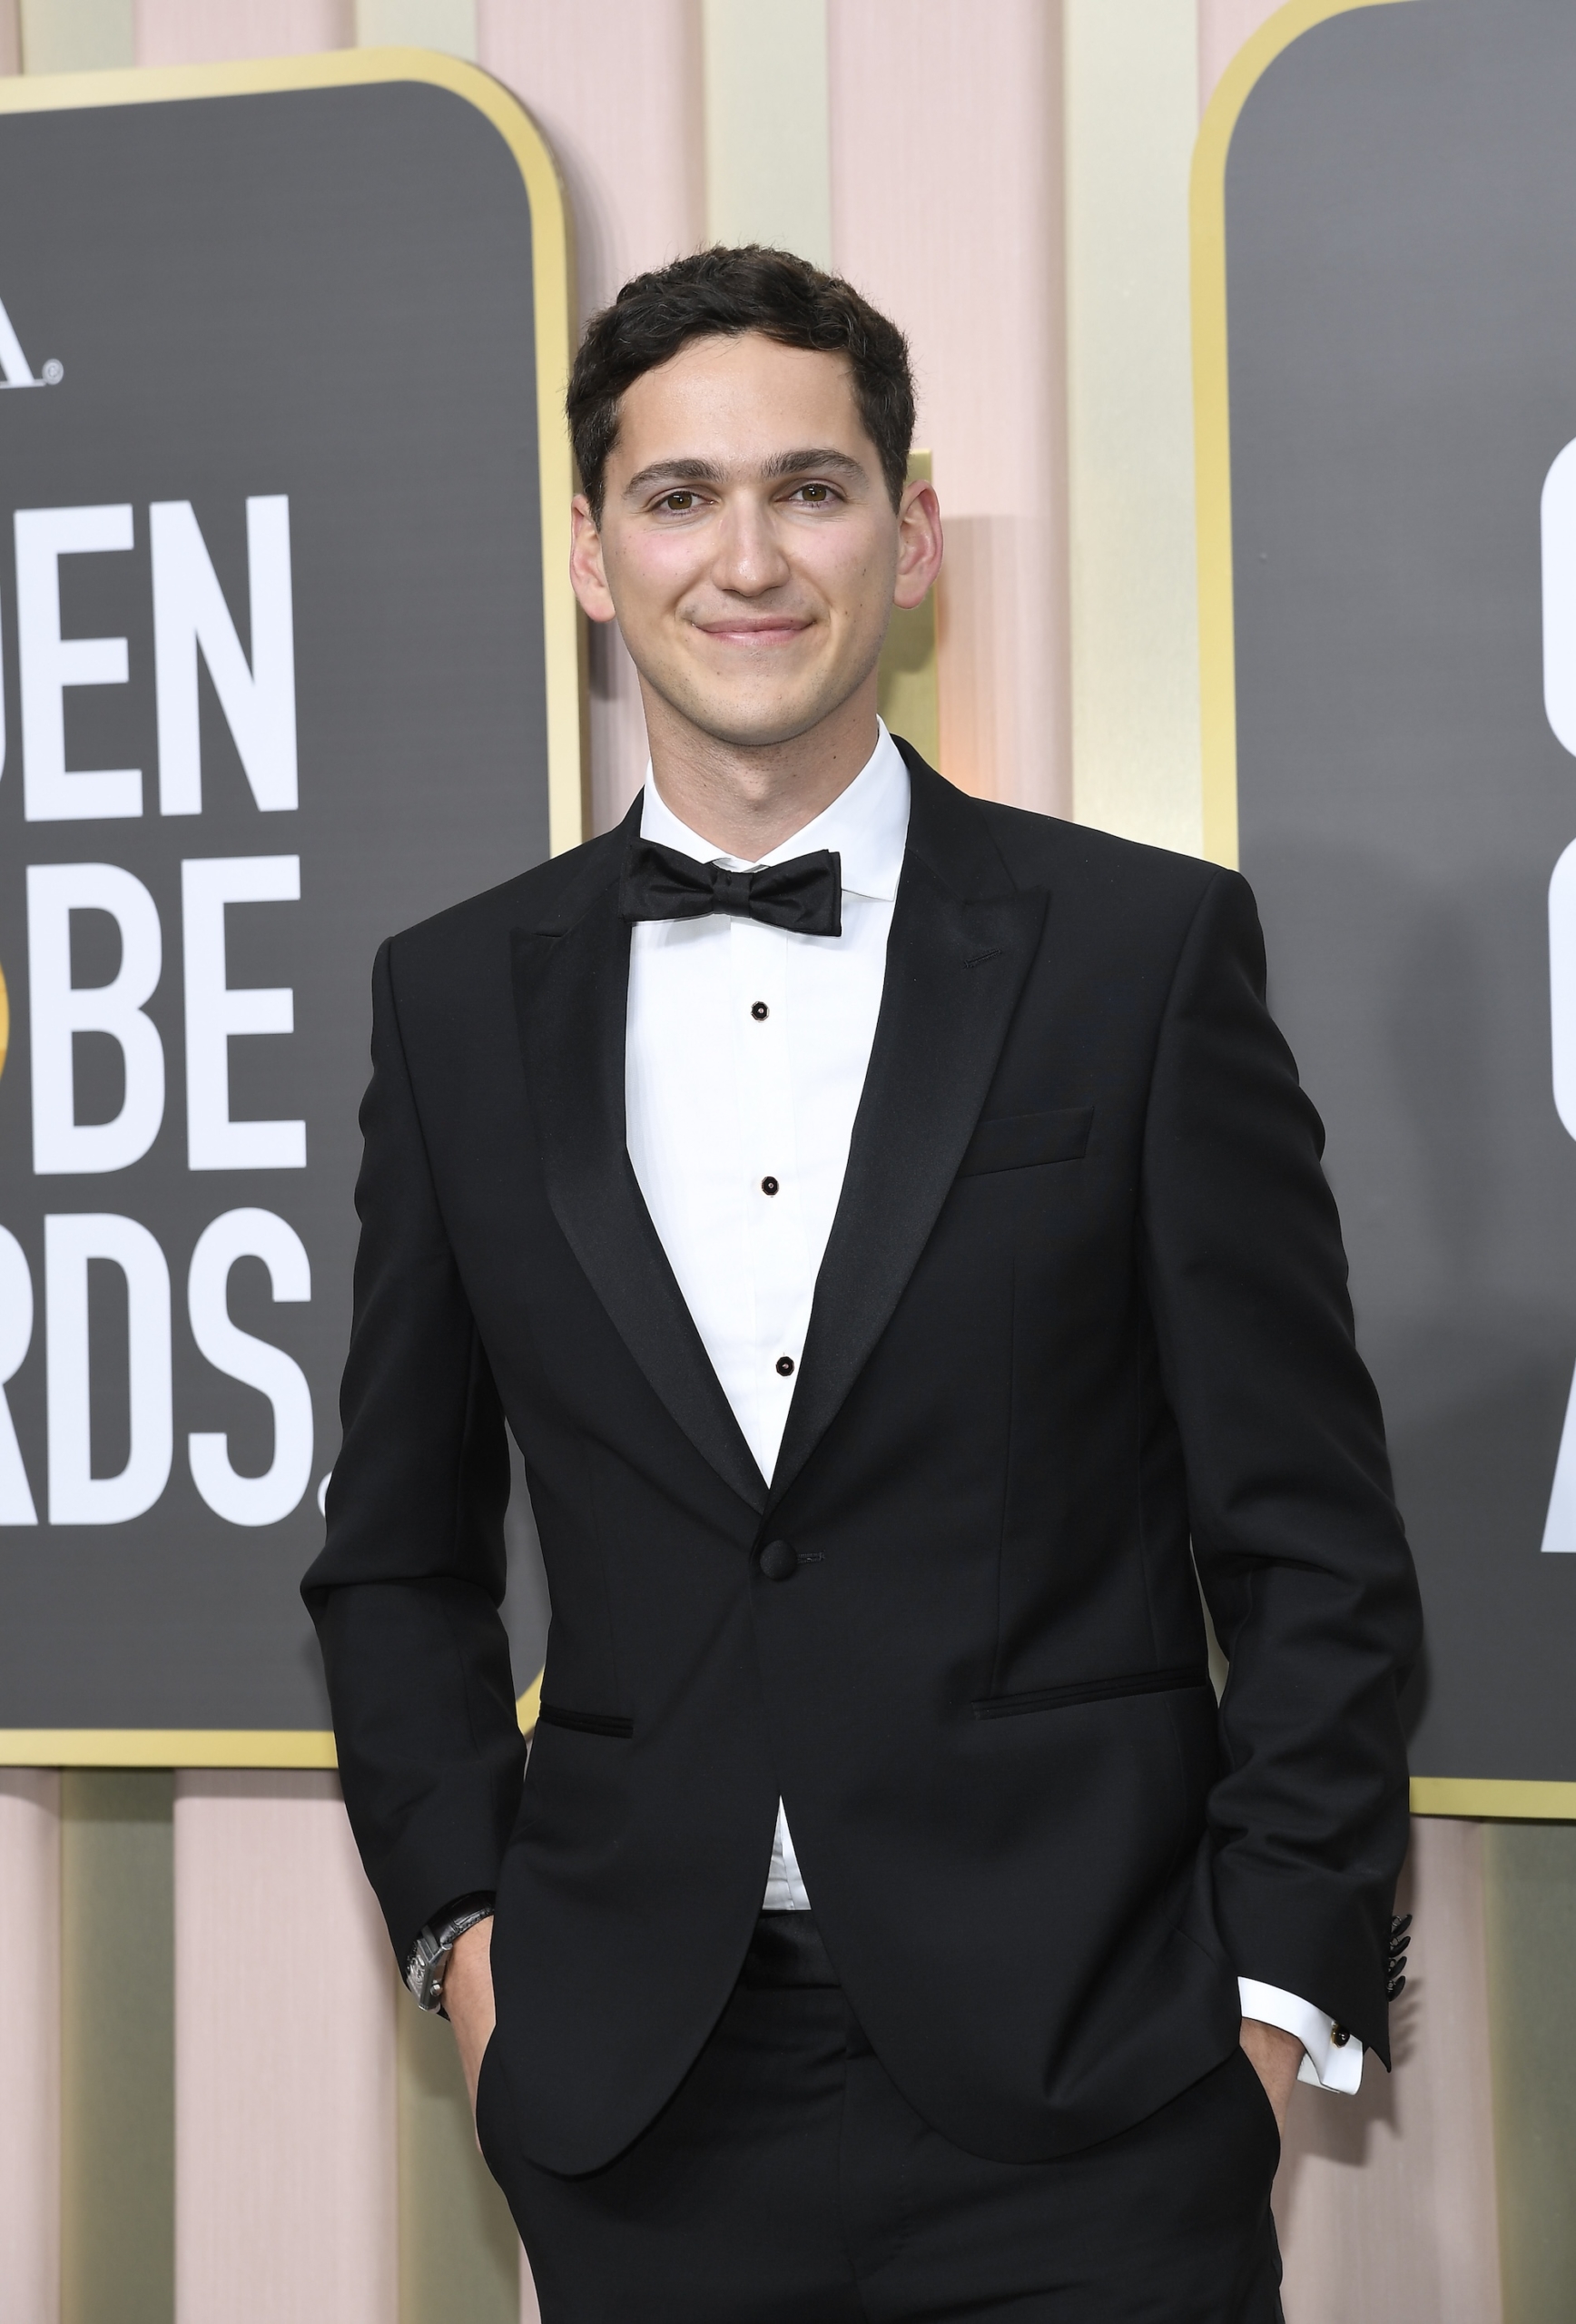 BEVERLY HILLS, CALIFORNIA - JANUARY 10: 80th Annual GOLDEN GLOBE AWARDS -- Pictured: Matt Friend arrives to the 80th Annual Golden Globe Awards held at the Beverly Hilton Hotel on January 10, 2023 in Beverly Hills, California. -- (Photo by Kevork Djansezian/NBC via Getty Images)